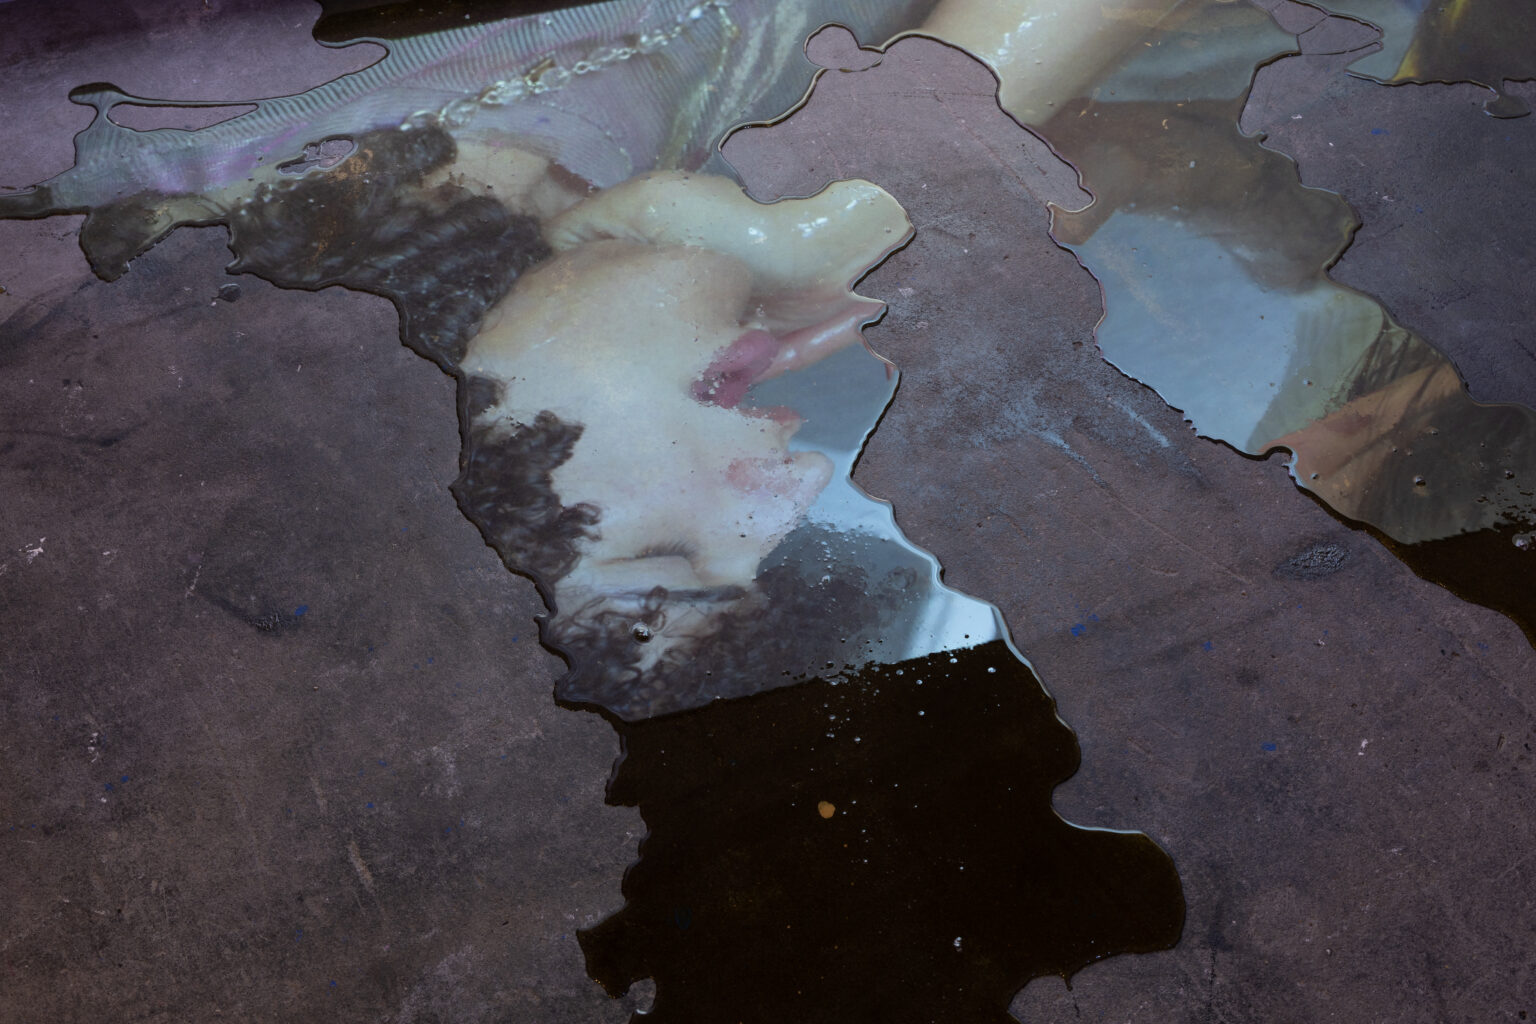 A fragmented still from a film is reflected in dark liquid seeping on the gallery floor. The reflected image is upside down, but it shows a person with their eyes shut and mouth open.